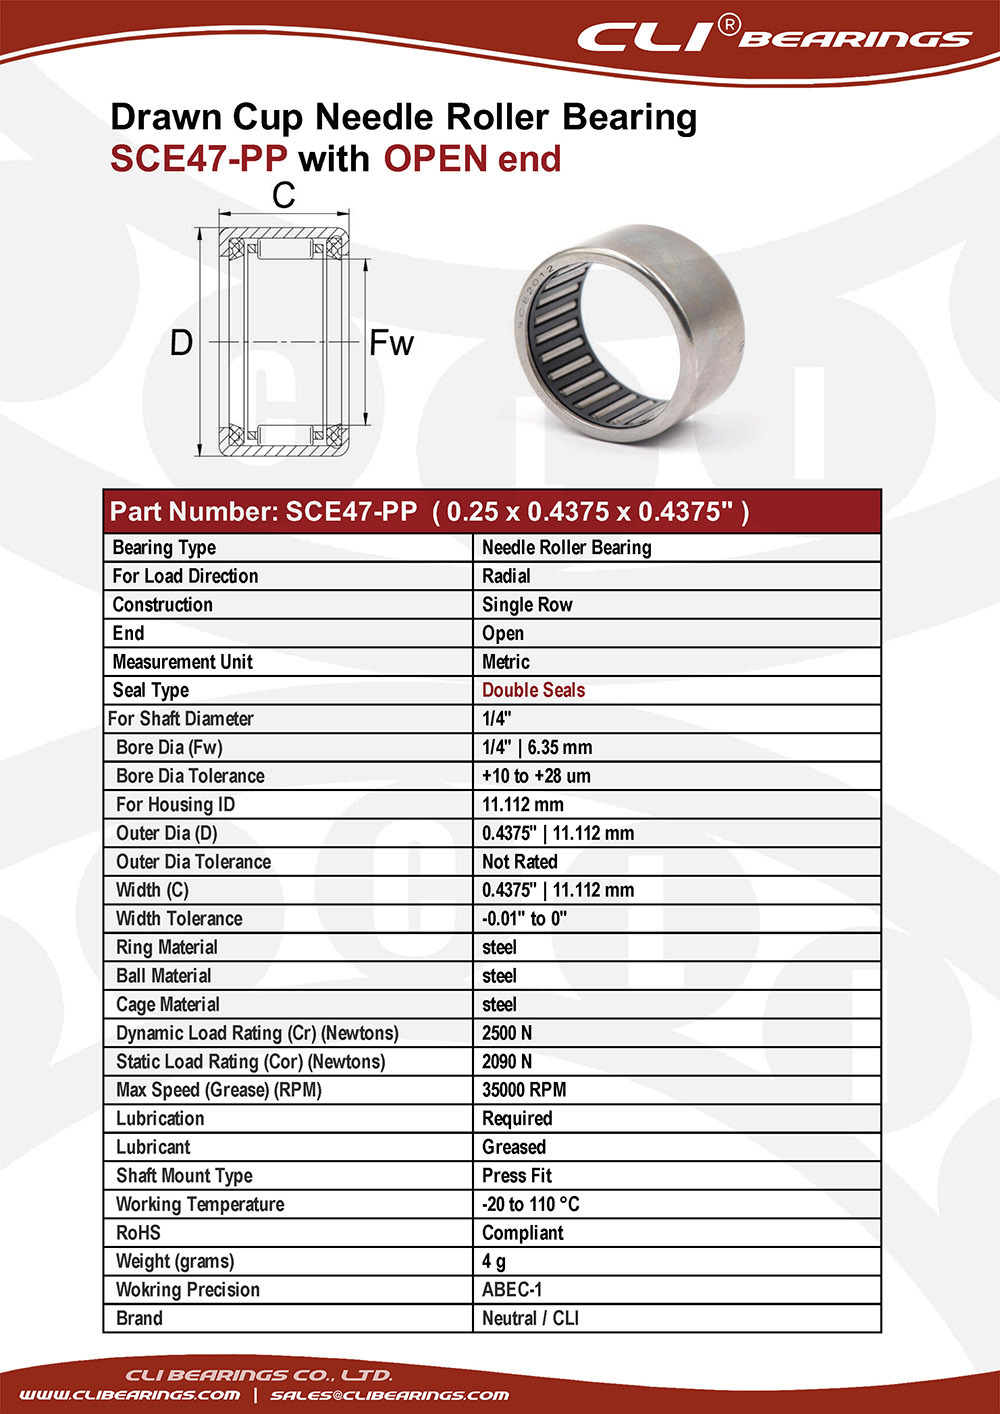 Original sce47 pp 0 25x0 4375x0 4375 drawn cup needle roller bearings with double seals   cli bearings co ltd nw